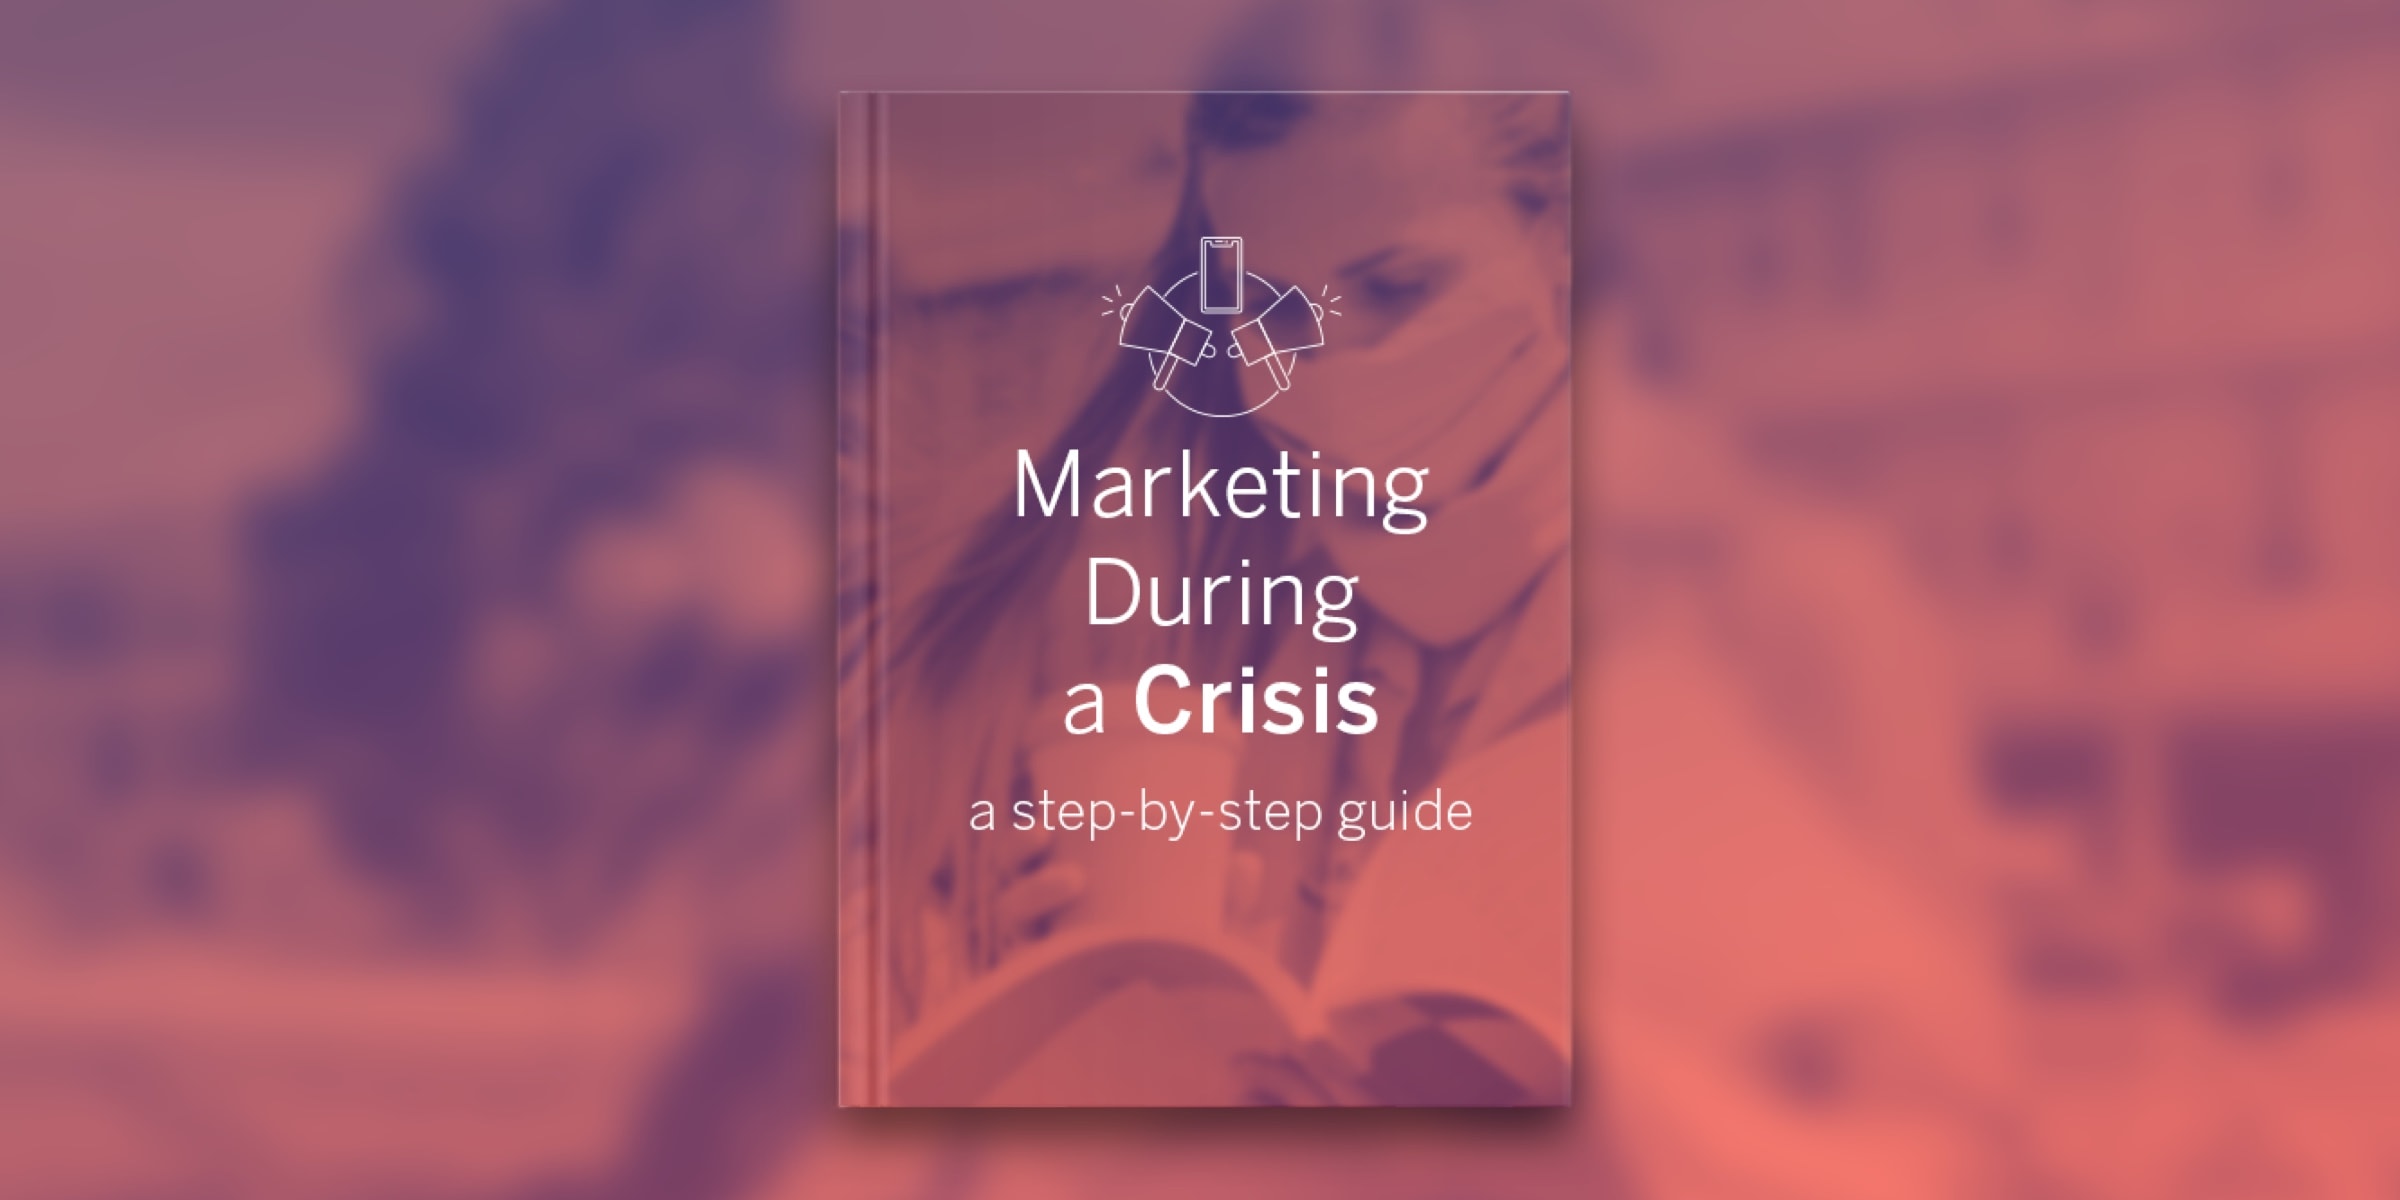 Higher Education Marketing During A Crisis: A Step-by-Step Guide